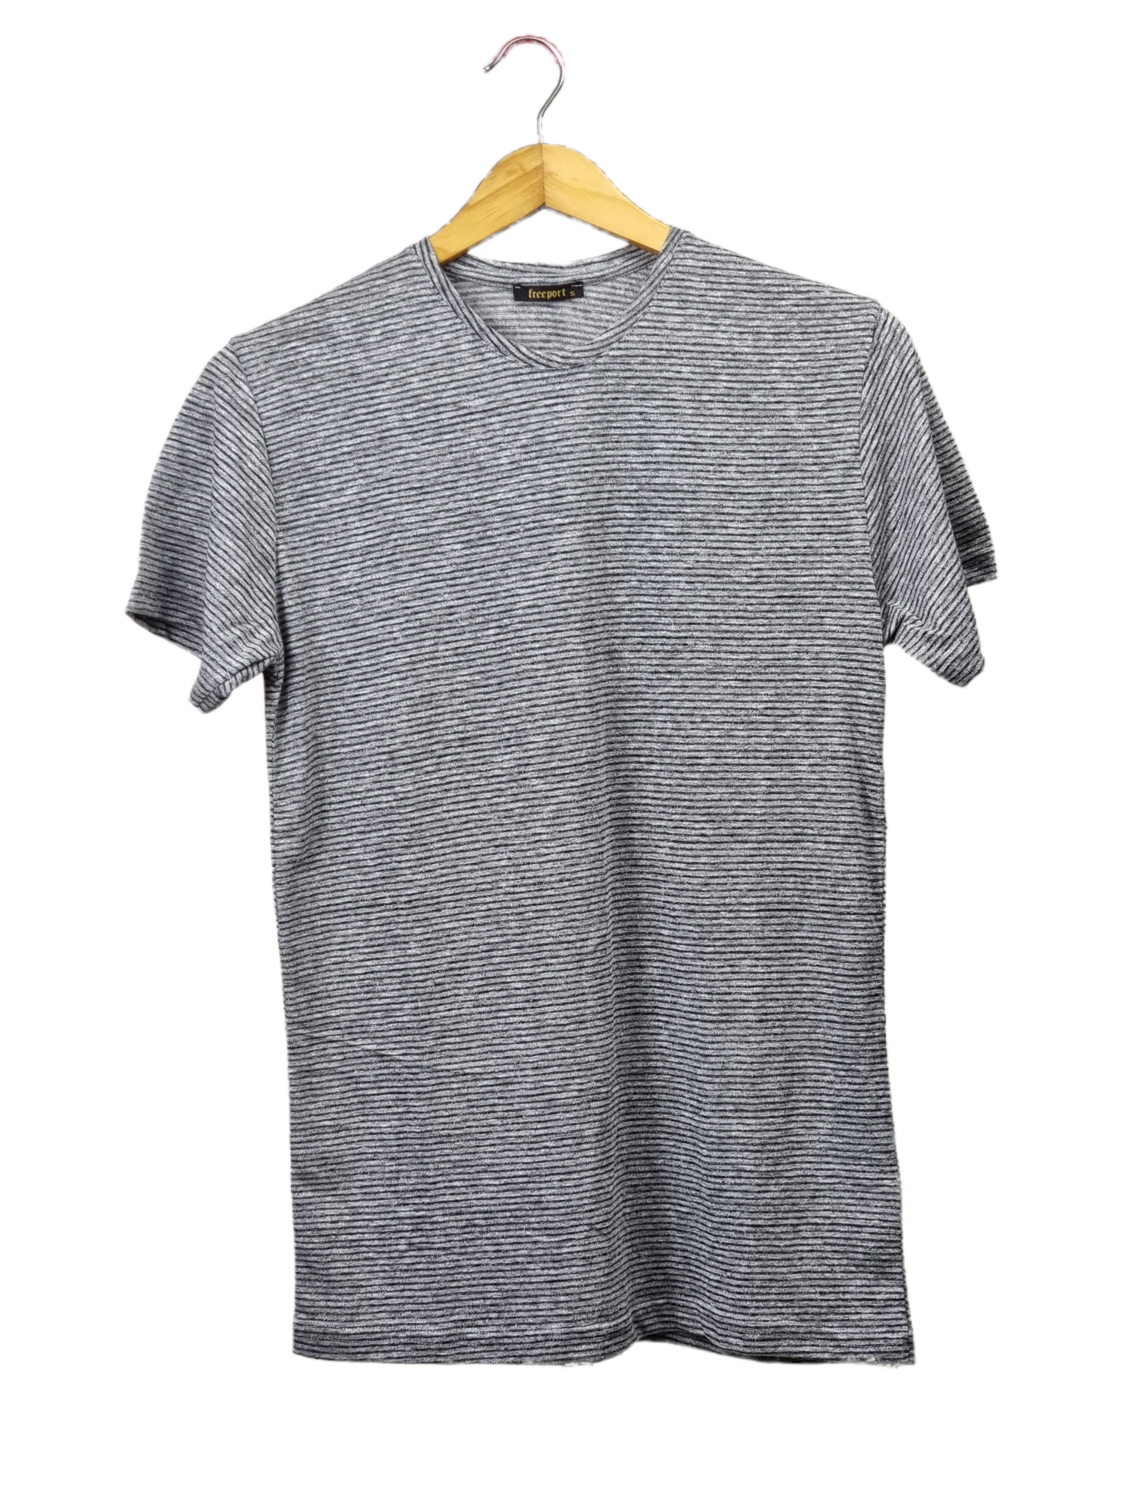 Black And Grey Striped T-Shirt